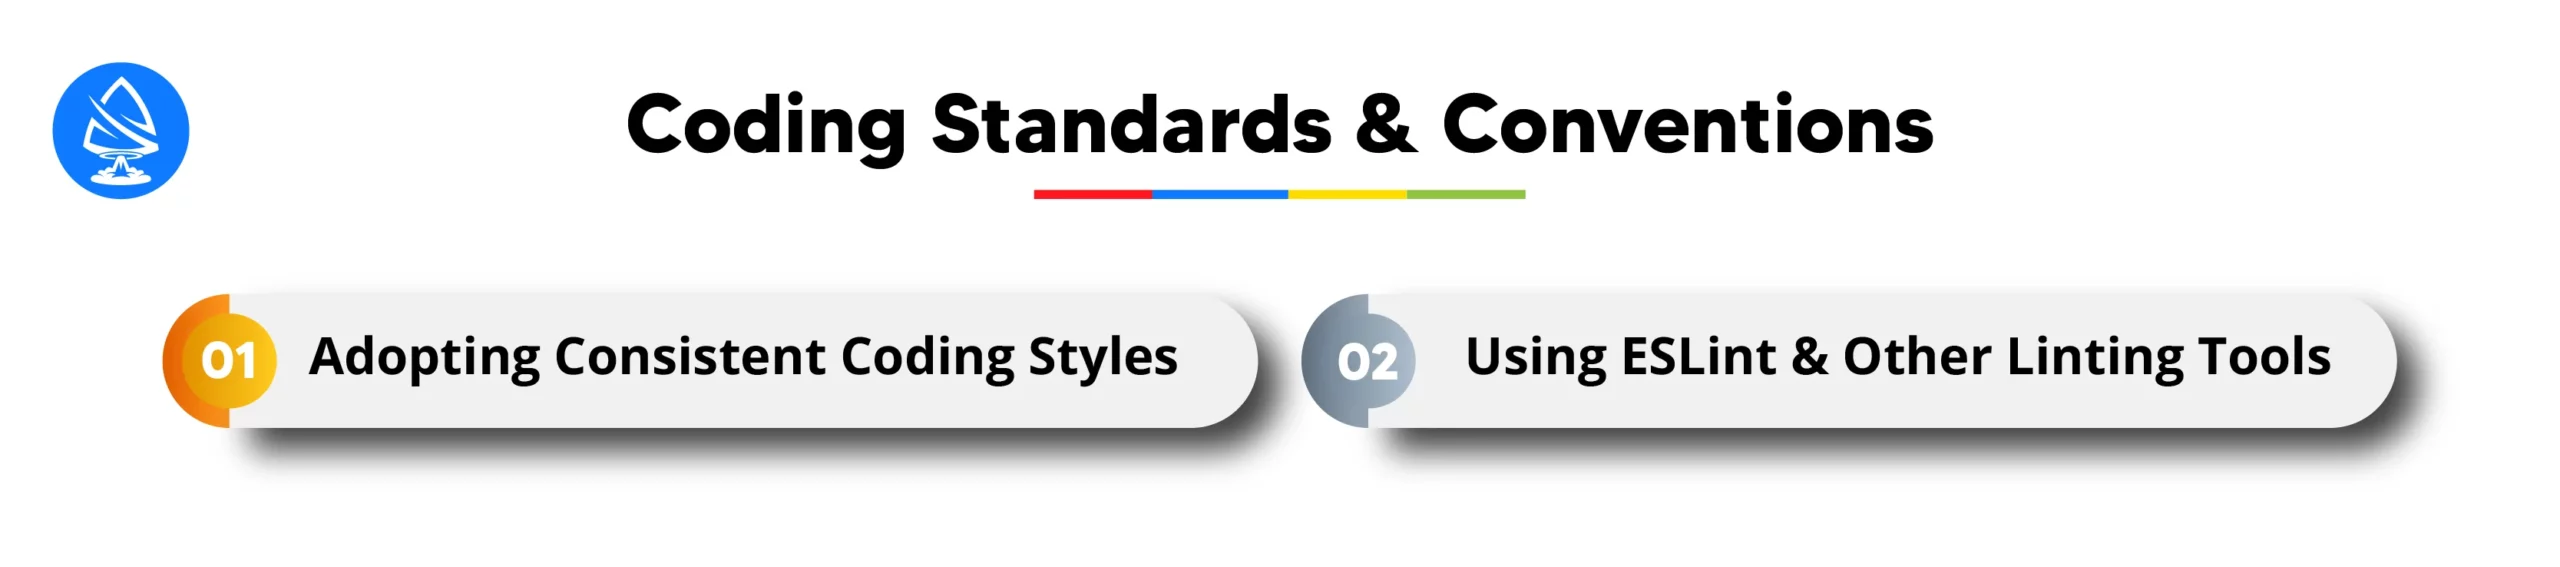 Coding Standards and Conventions